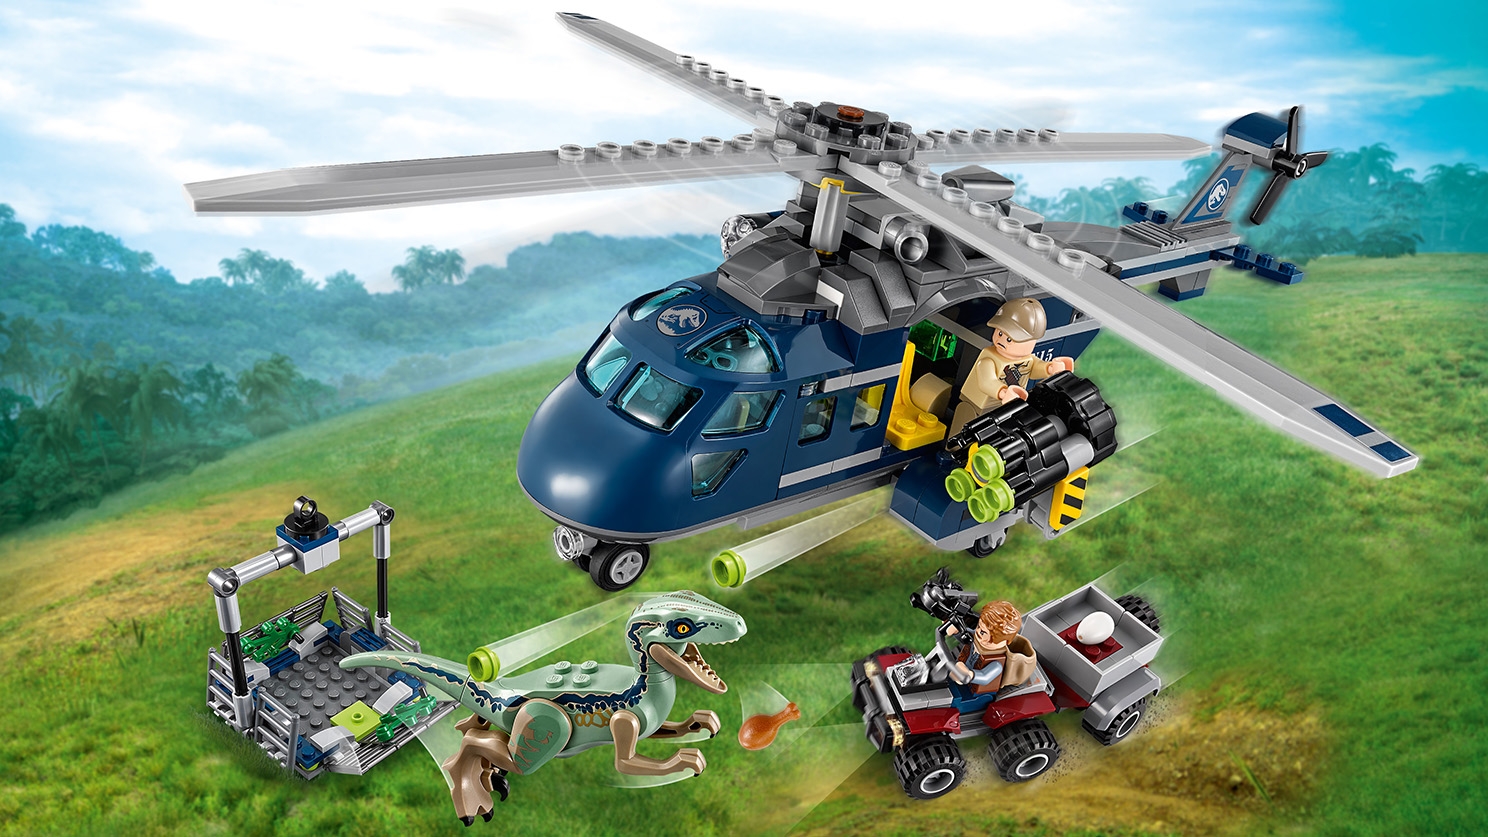 Lego Jurassic World Blue's Helicopter Pursuit 75928 NEW